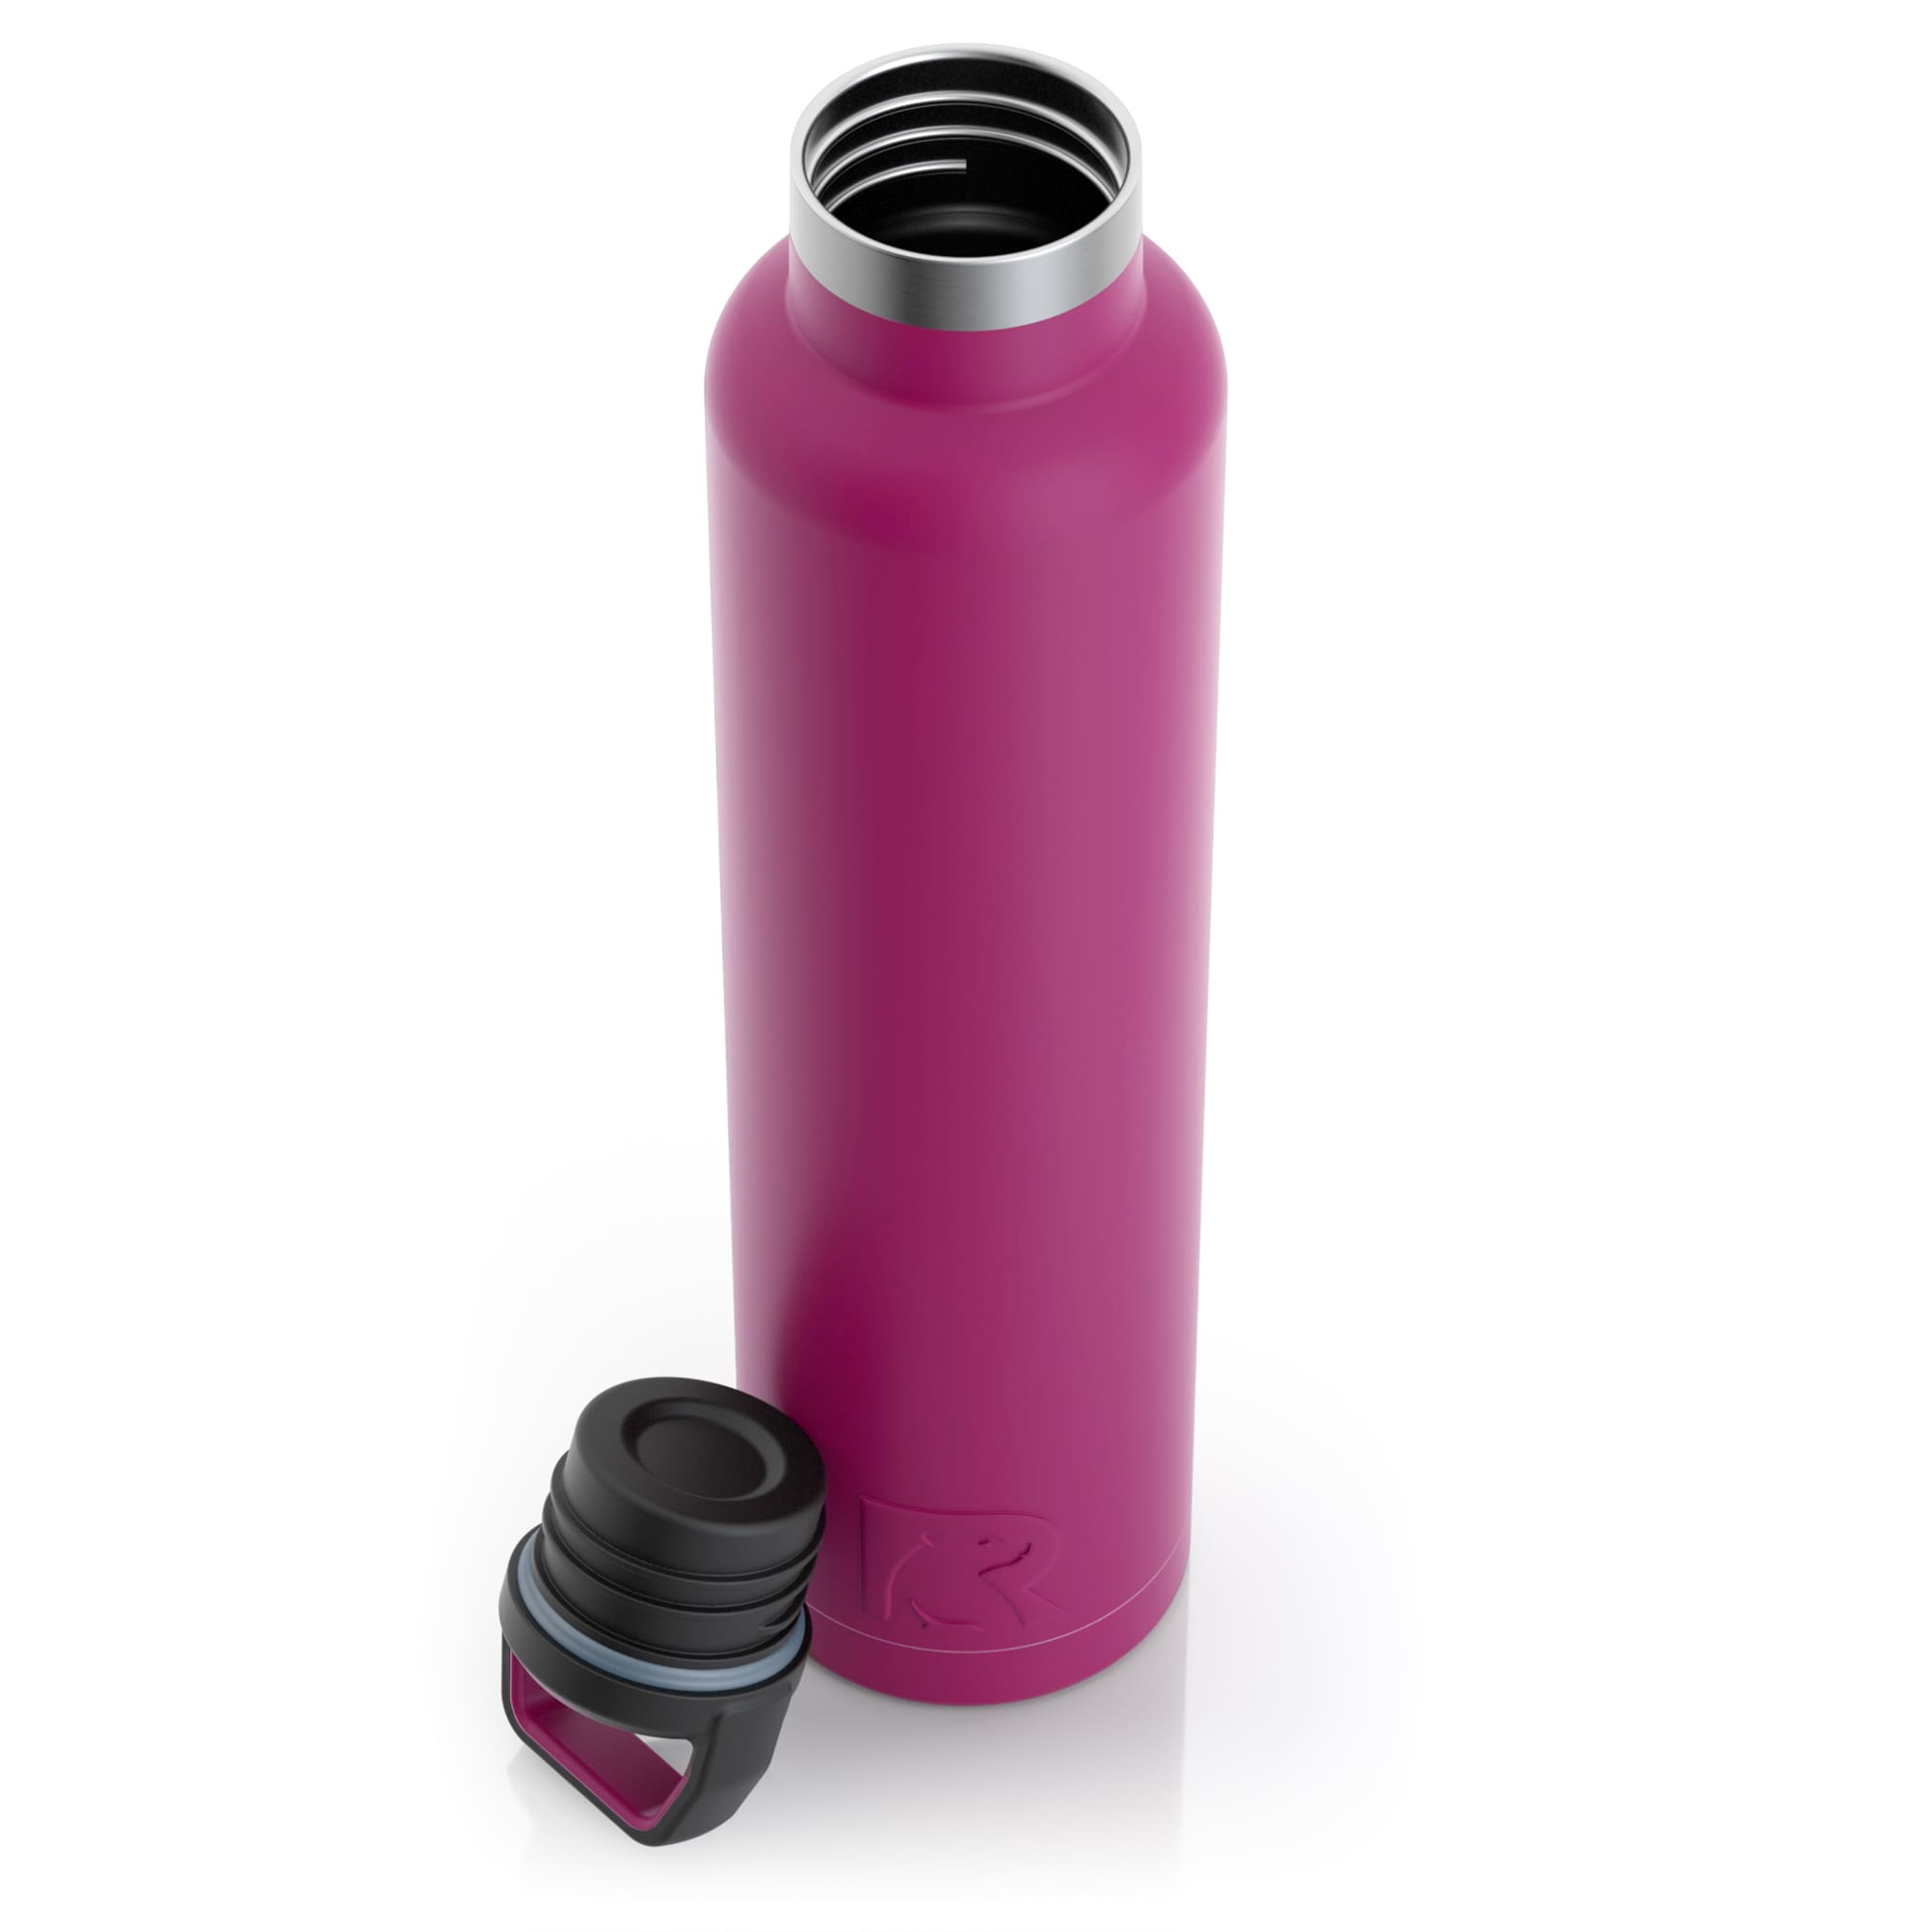 Insulated Water Bottle, 1000ml 32 oz Stainless Steel Double Wall